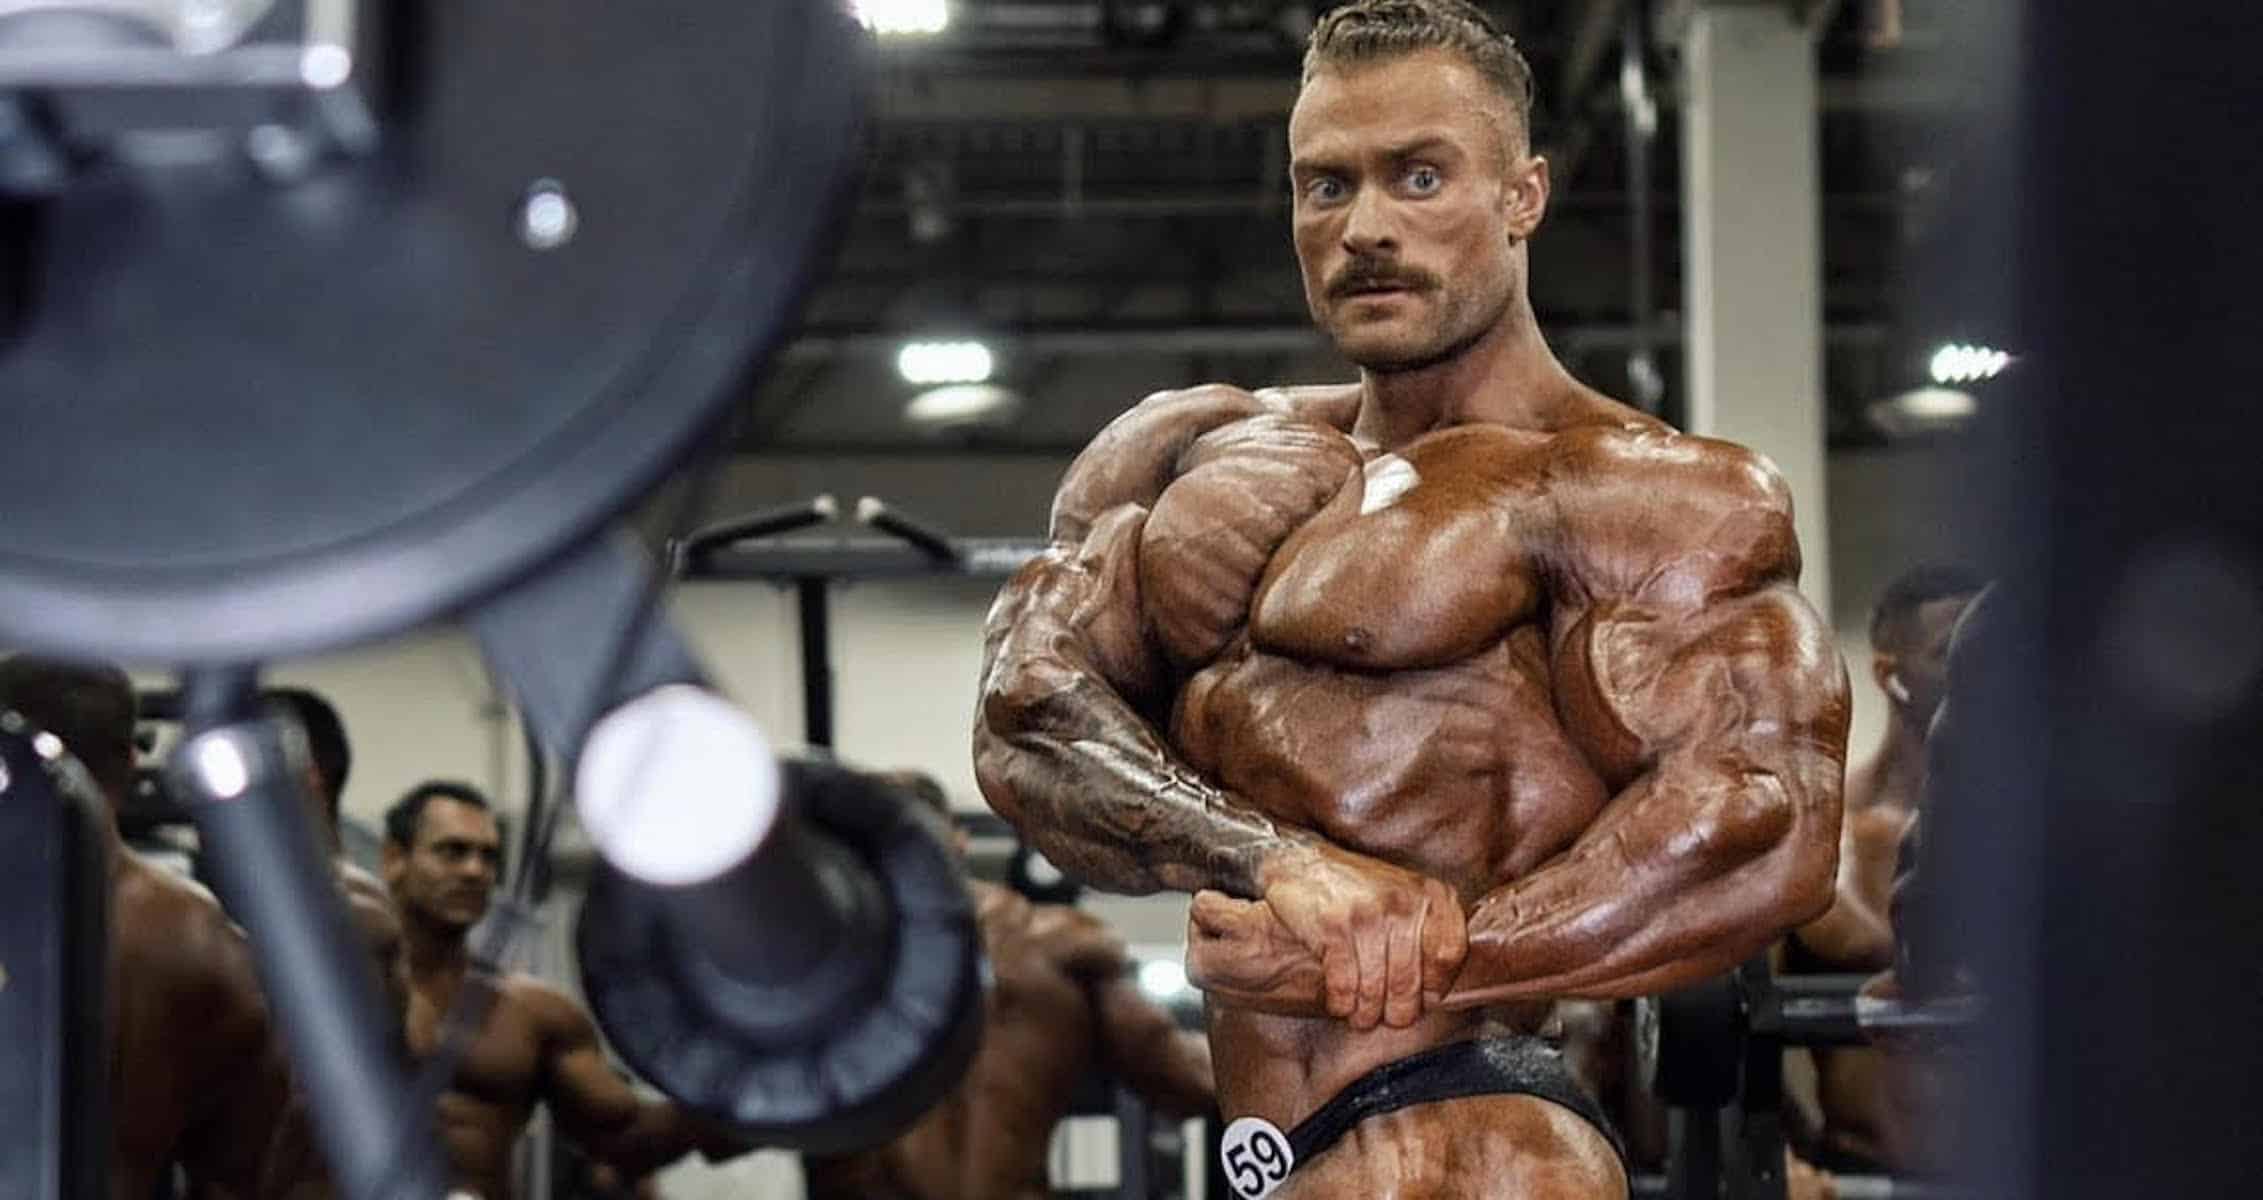 chris bumstead full day of eating for 2023 Olympia